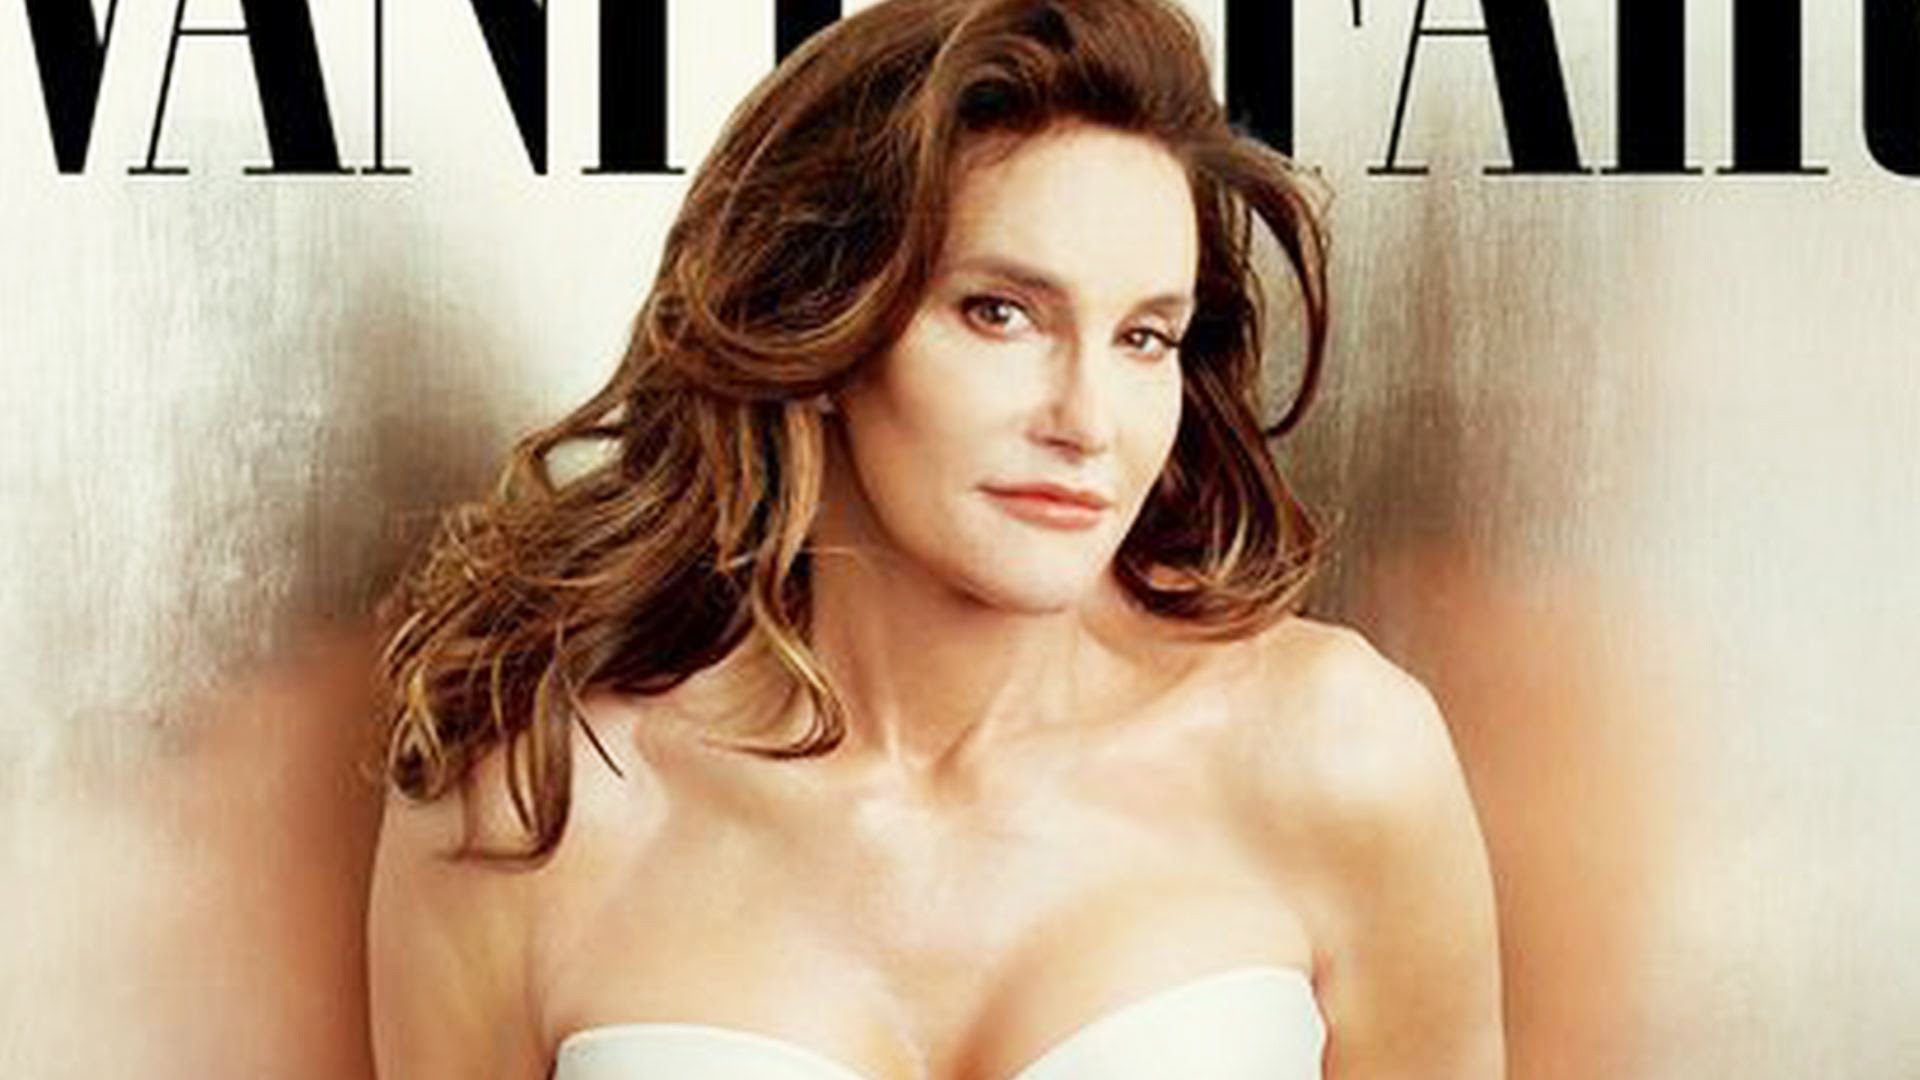 http://indianexpress.com/article/entertainment/entertainment-others/caitlyn-jenner-to-endorse-mac/